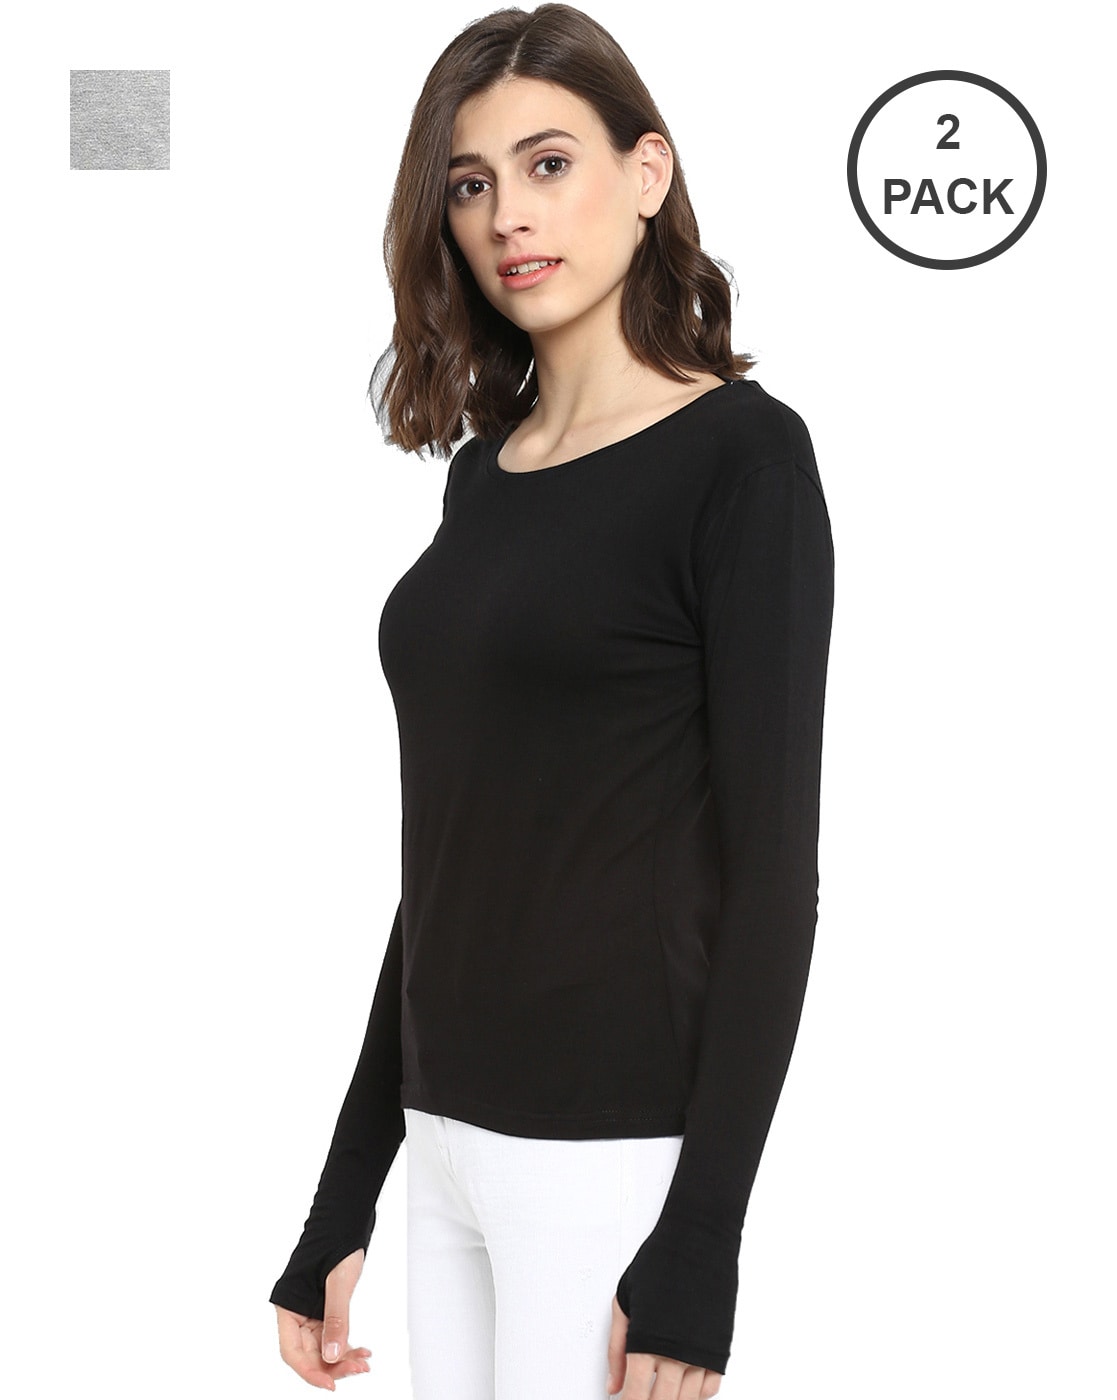 Buy Black Tshirts for Women by Ap'pulse Online